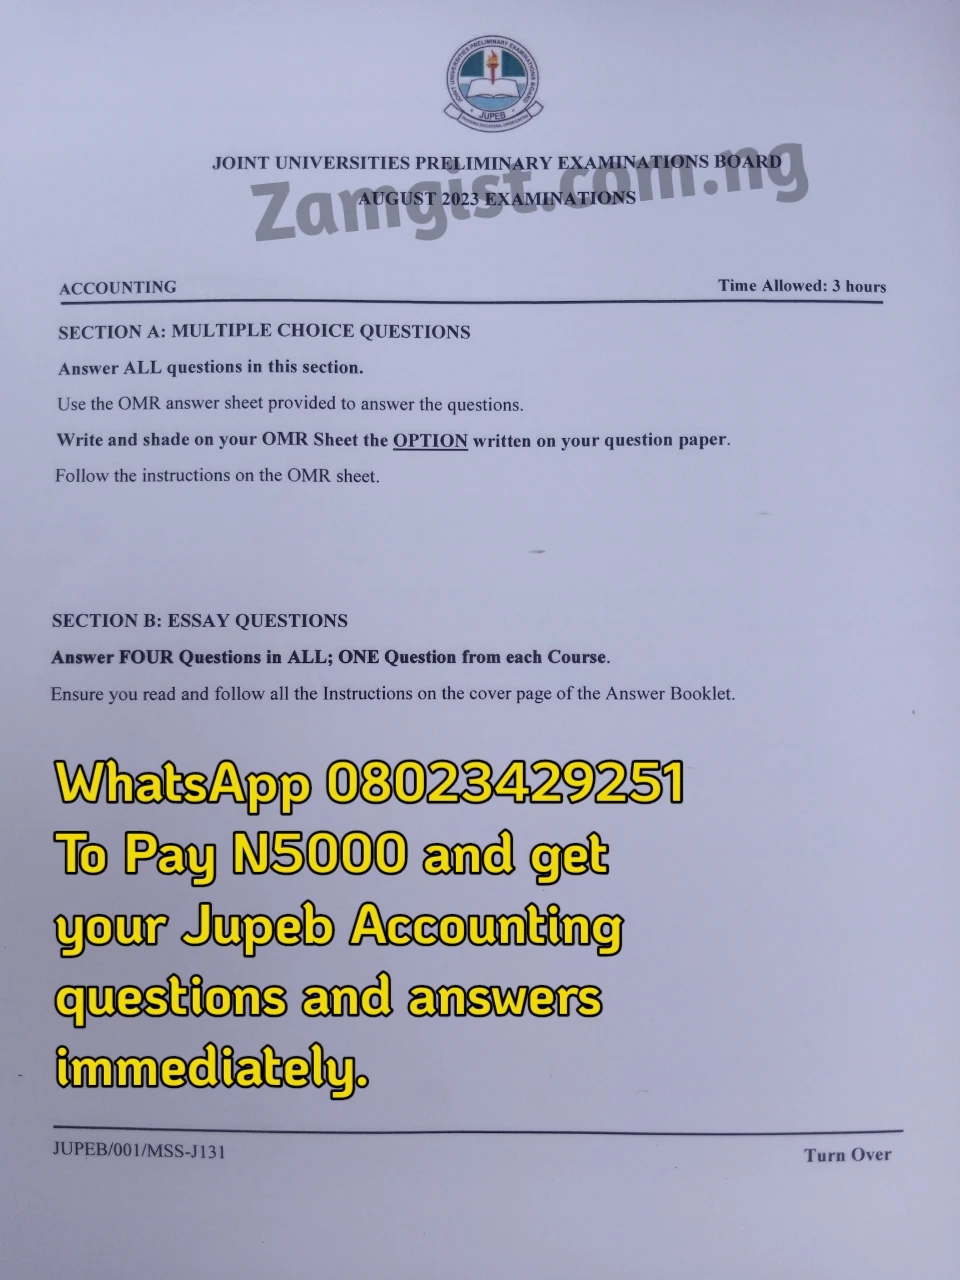 JUPEB Accounting 2023 Questions And Answers